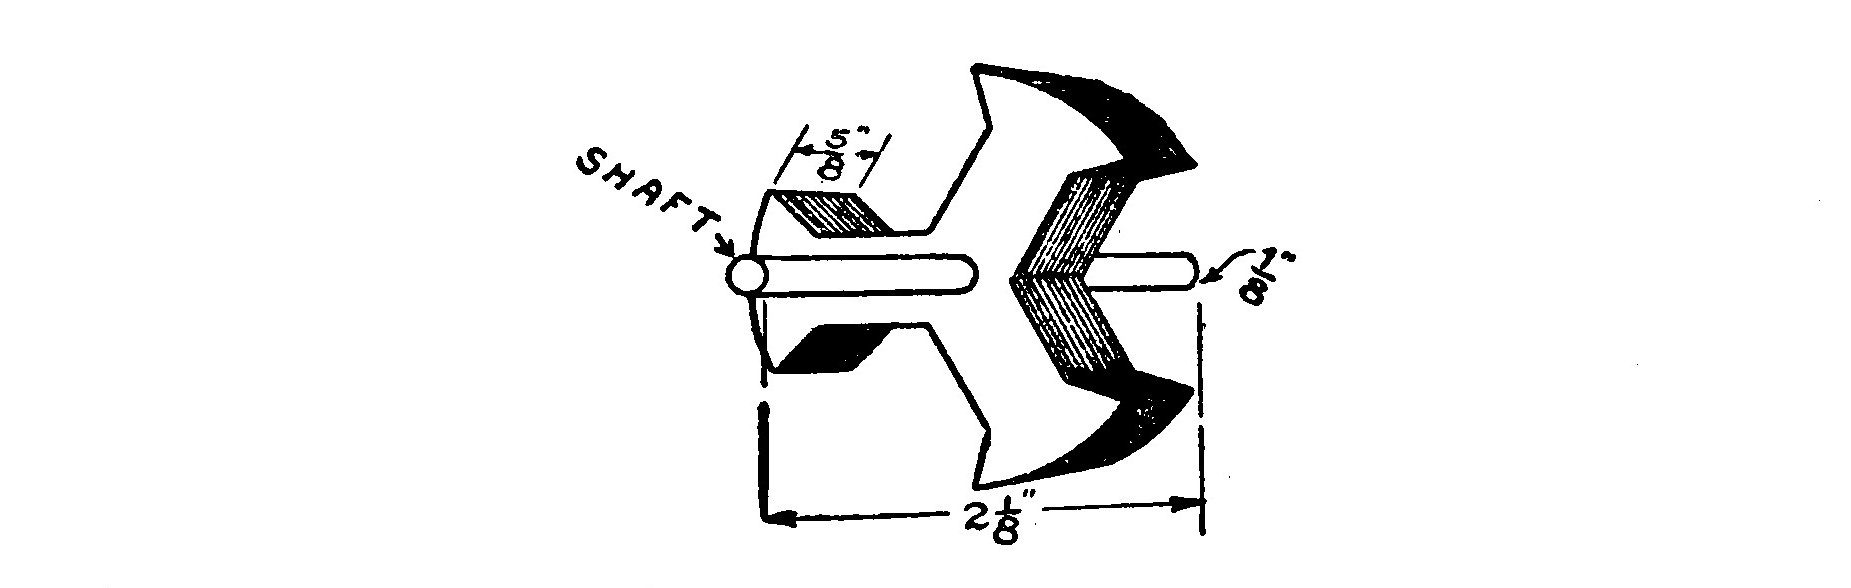 FIG. 44.—The Armature assembled on the Shaft ready to Wind.